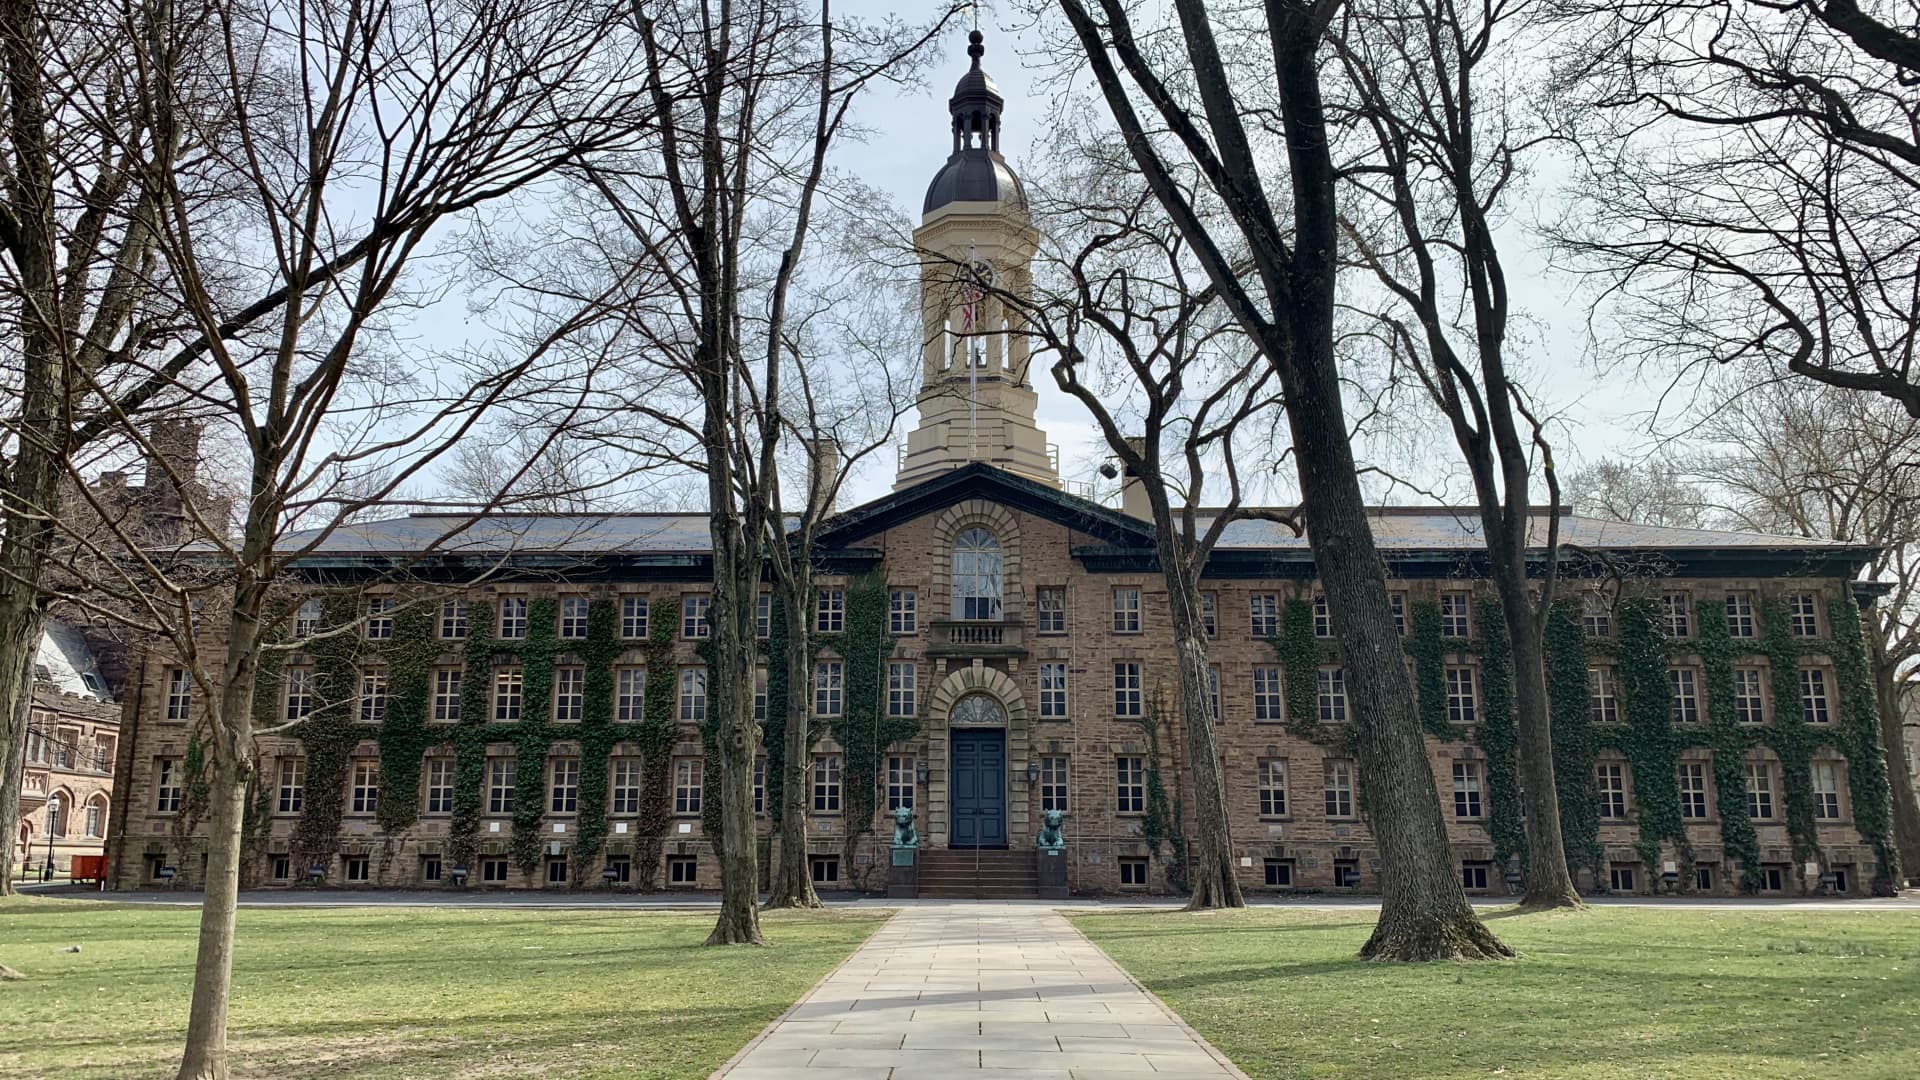 Princeton University's campus was largely deserted as of March 18, 2020 as a growing number of colleges require students to leave for the remainder of the spring semester.